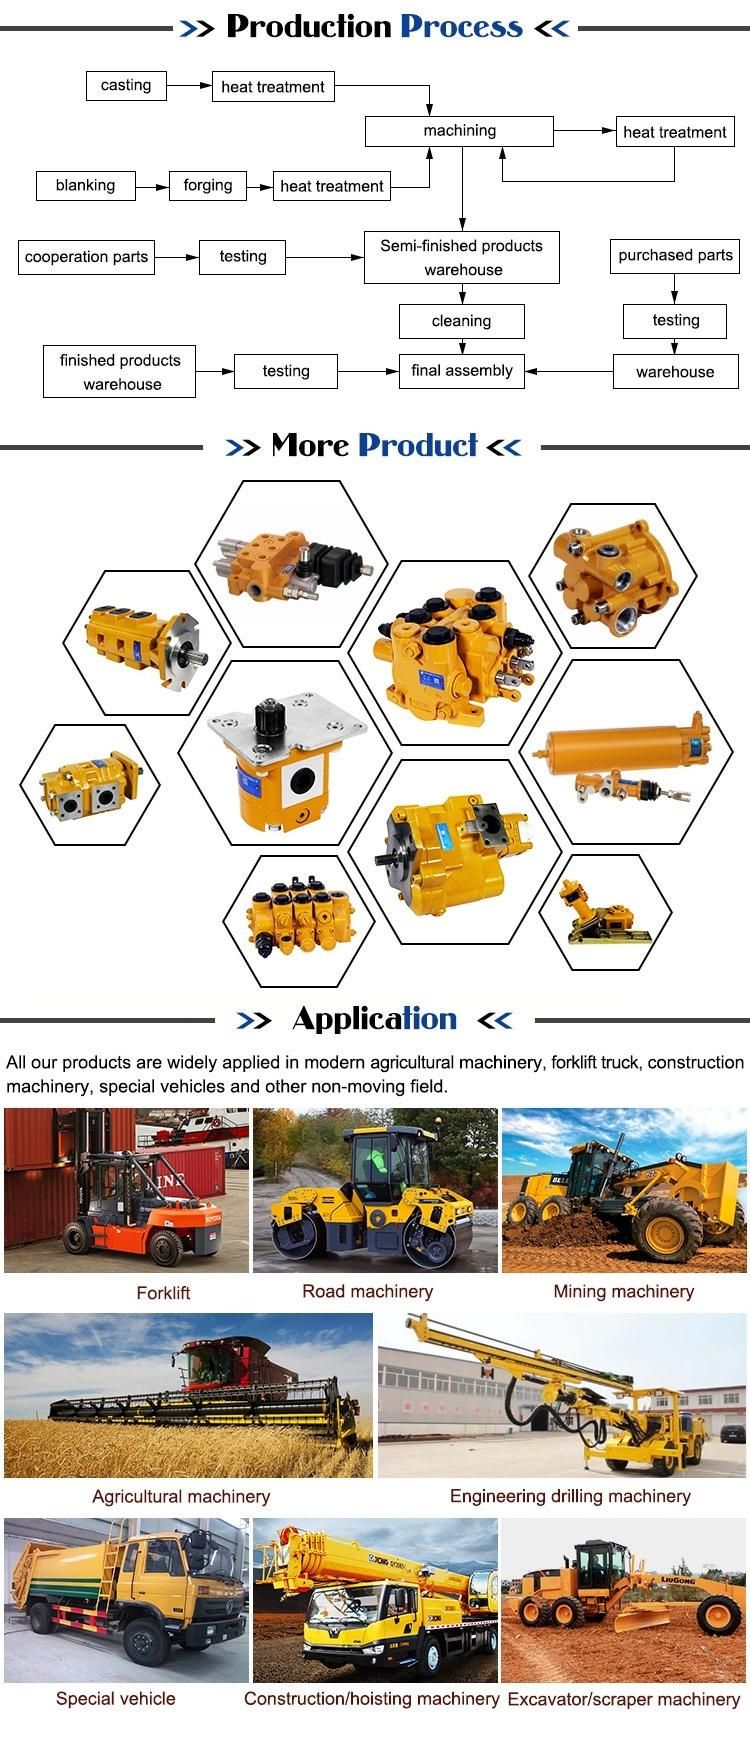 Hydraulic Gear Pump for Forklift, Tractor, Crane, Construction Machinery